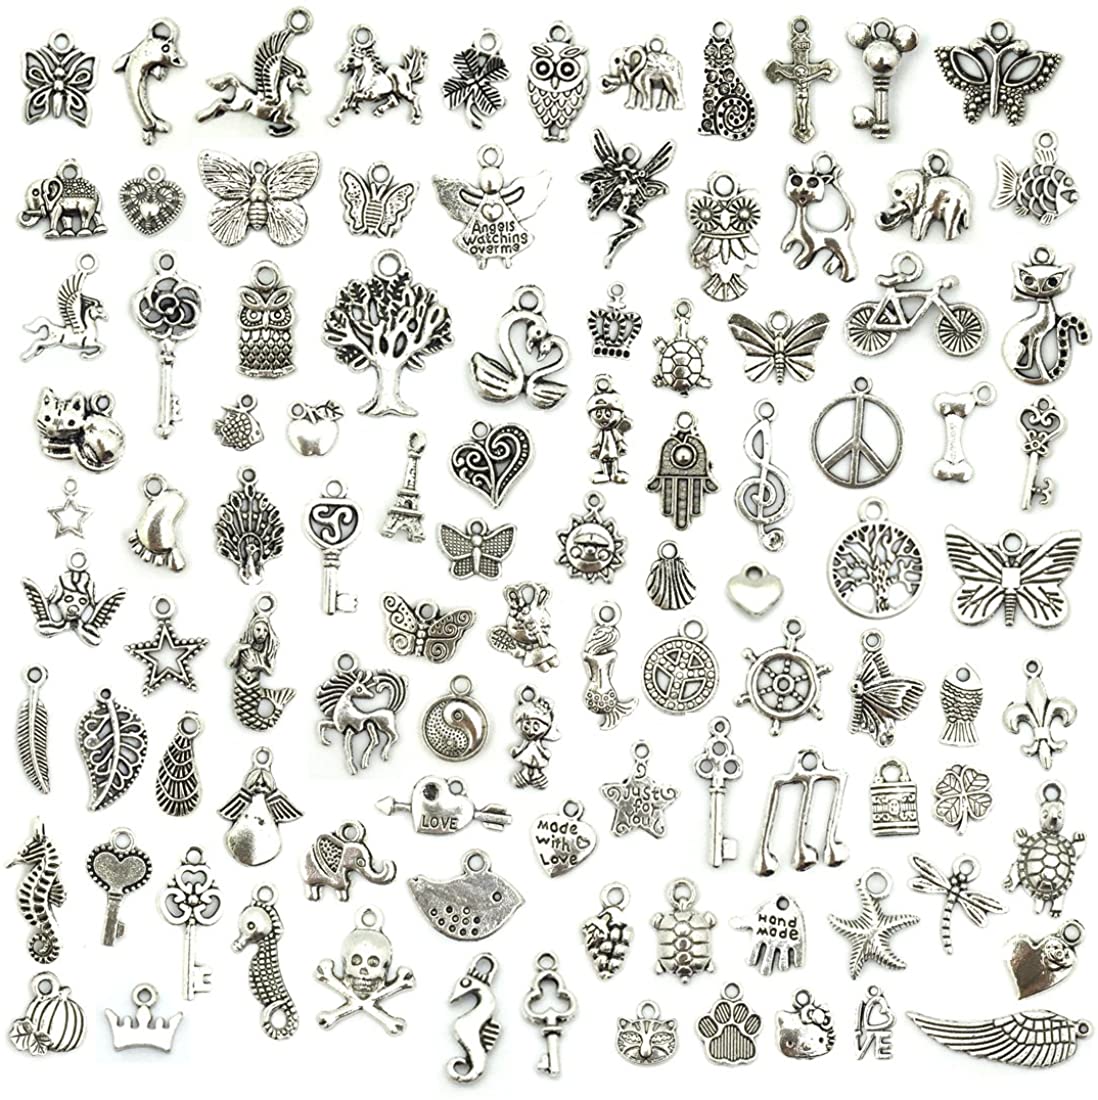 Wholesale Bulk Lots Jewelry Making Silver Charms Mixed Smooth Tibetan Silver Metal Charms Pendants DIY for Necklace Bracelet Jewelry Making and